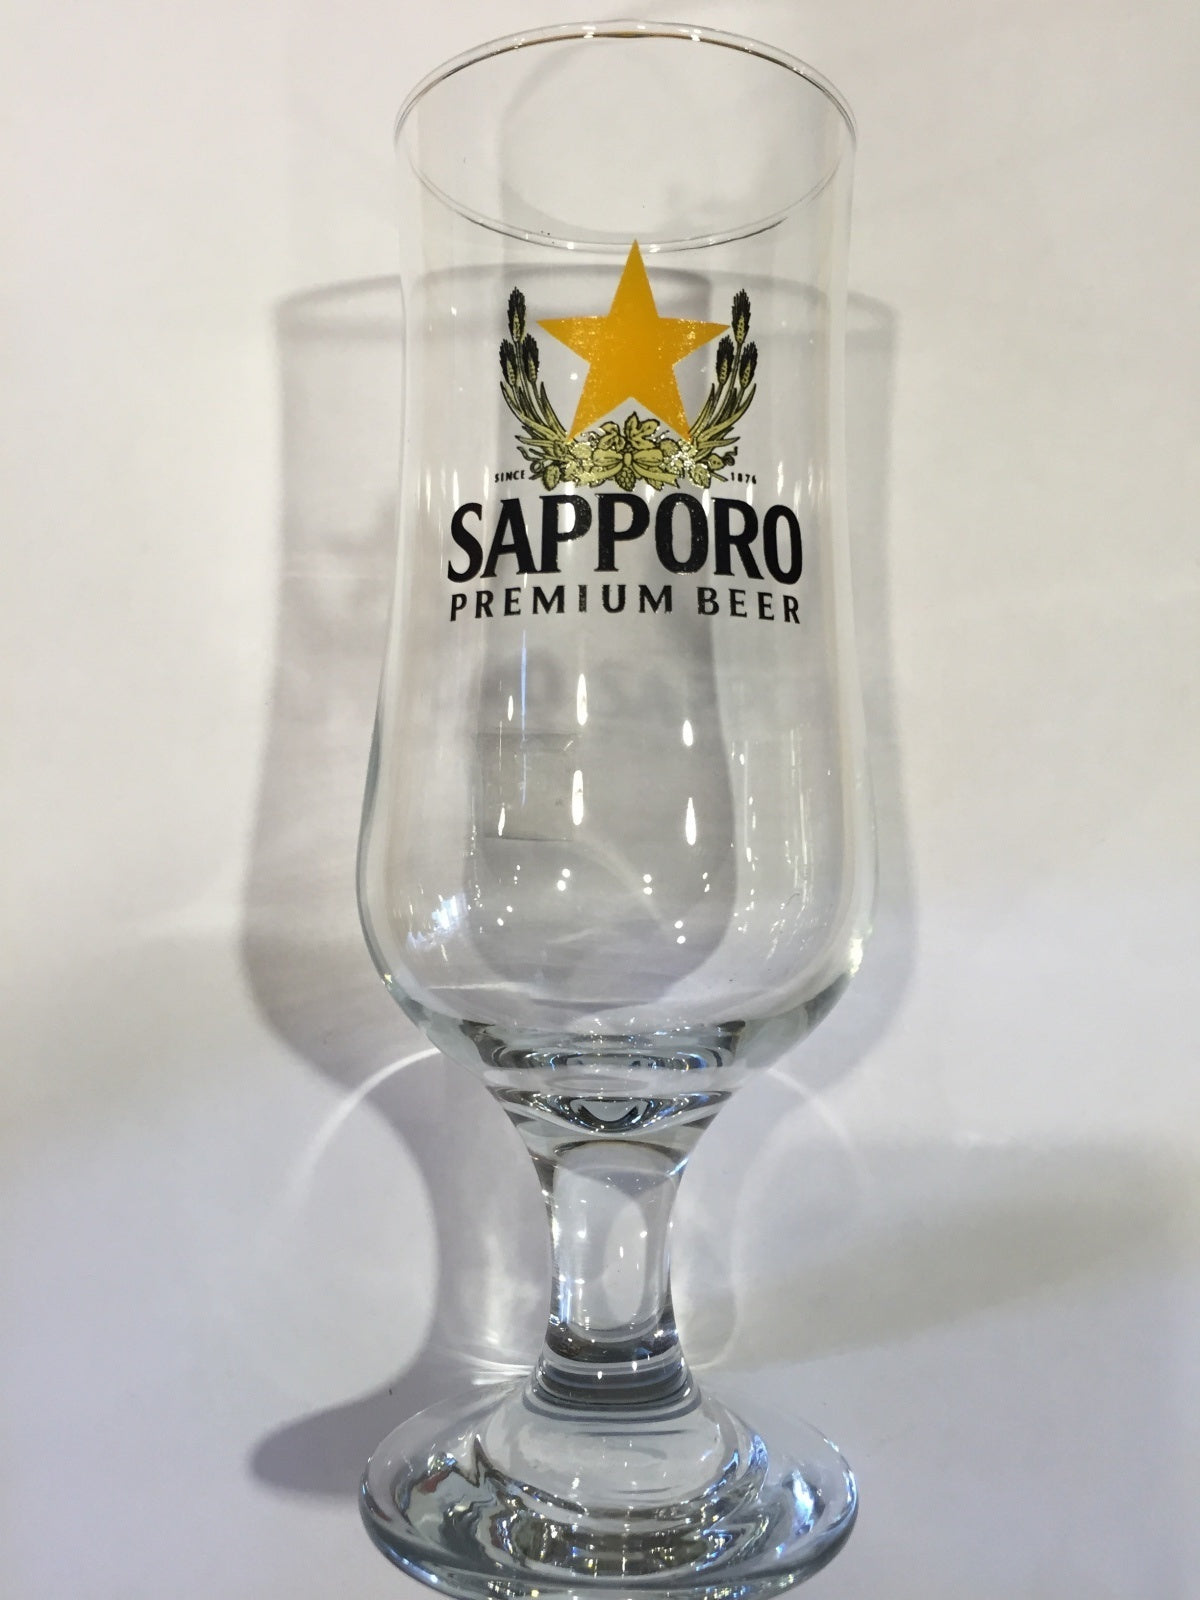 Sapporo beer glass